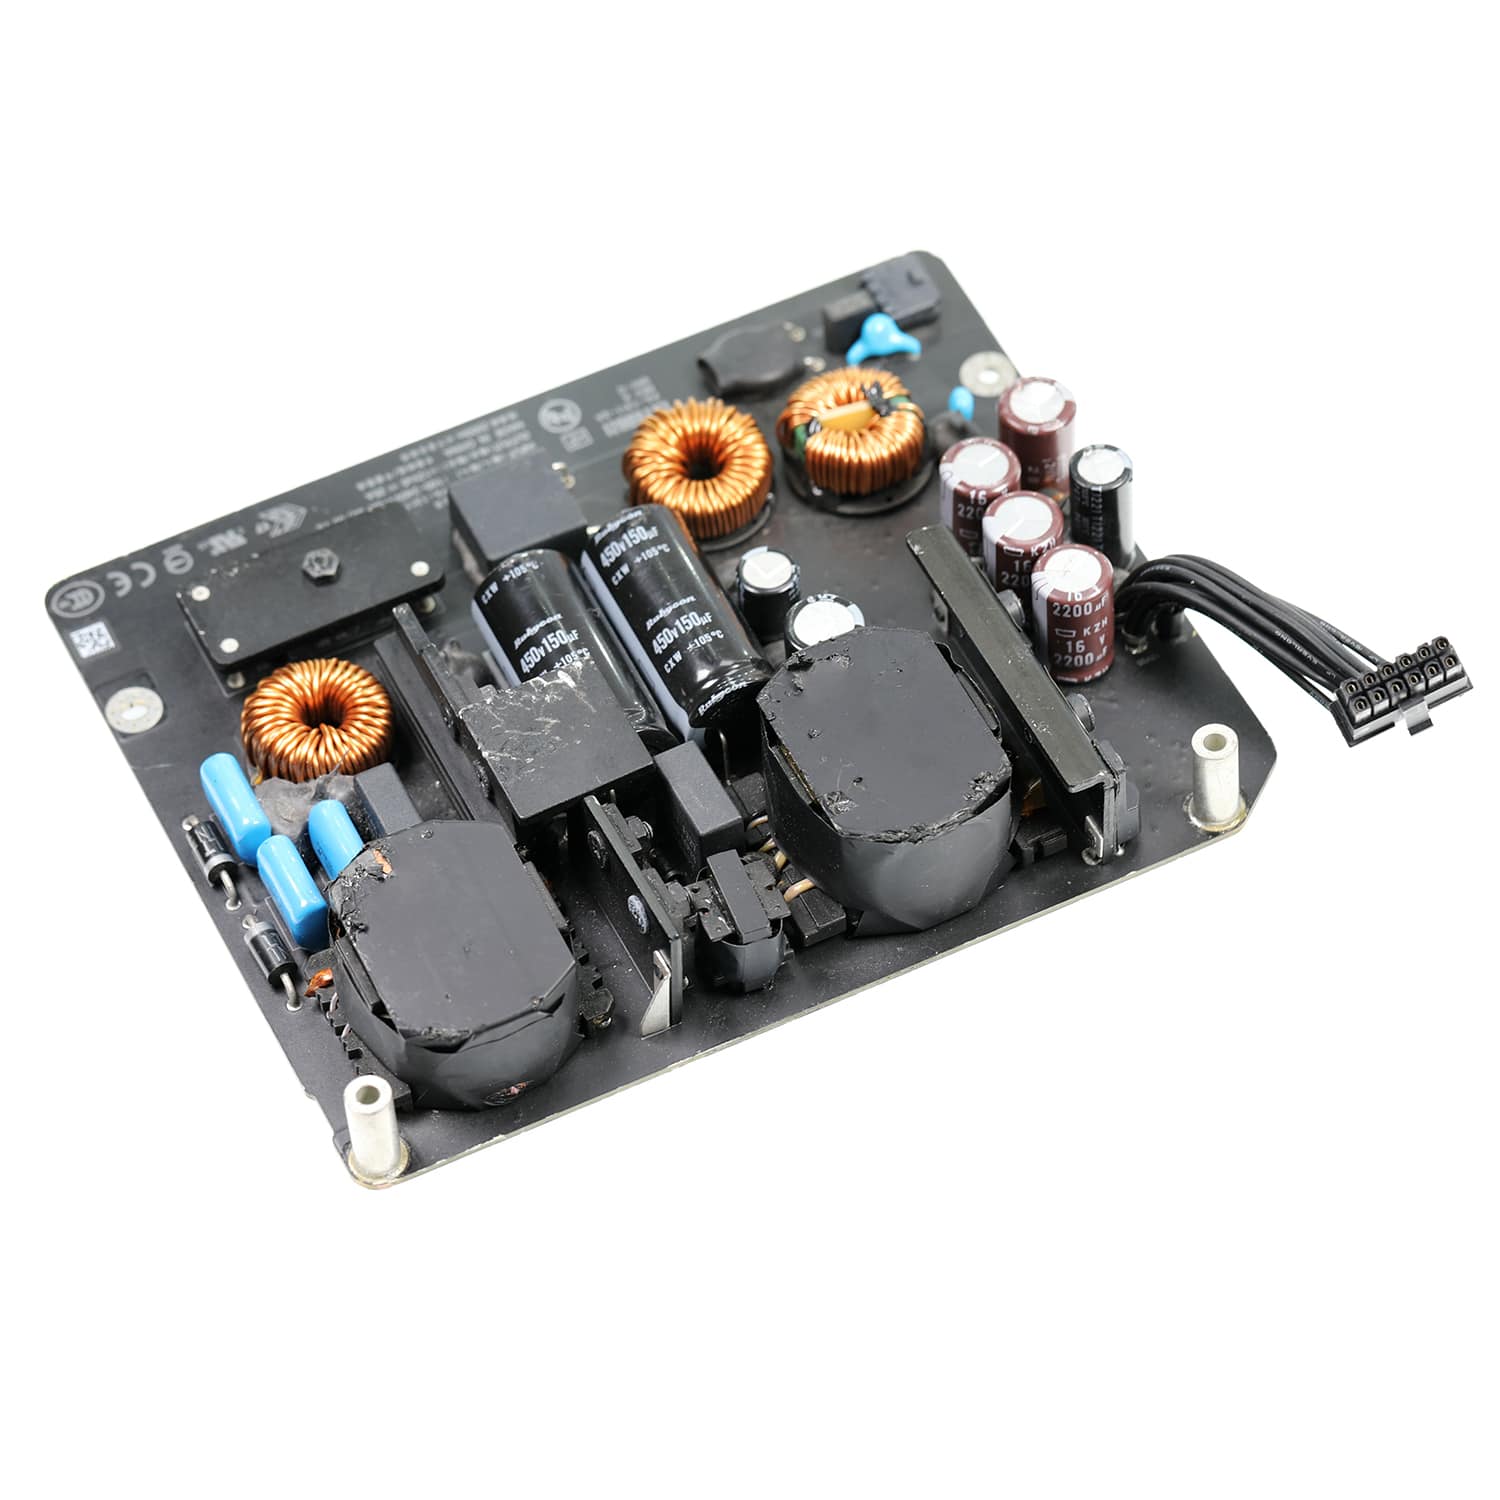 POWER SUPPLY (300W) FOR IMAC 27" A1419 (LATE 2012)